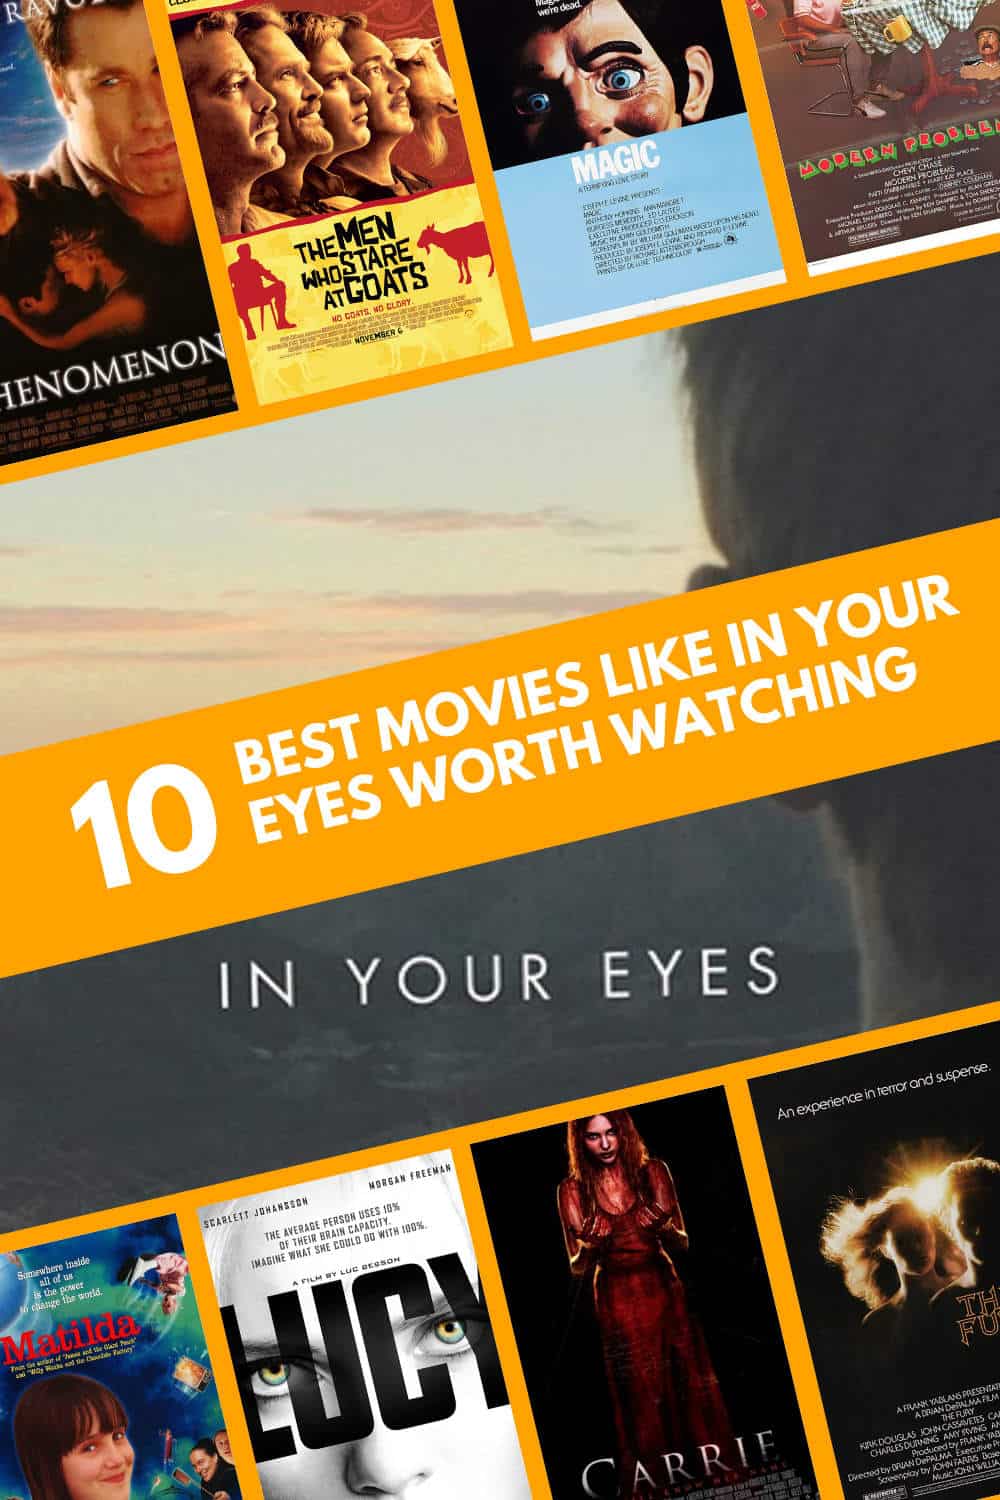 Movie Like In Your Eyes Worth Watching